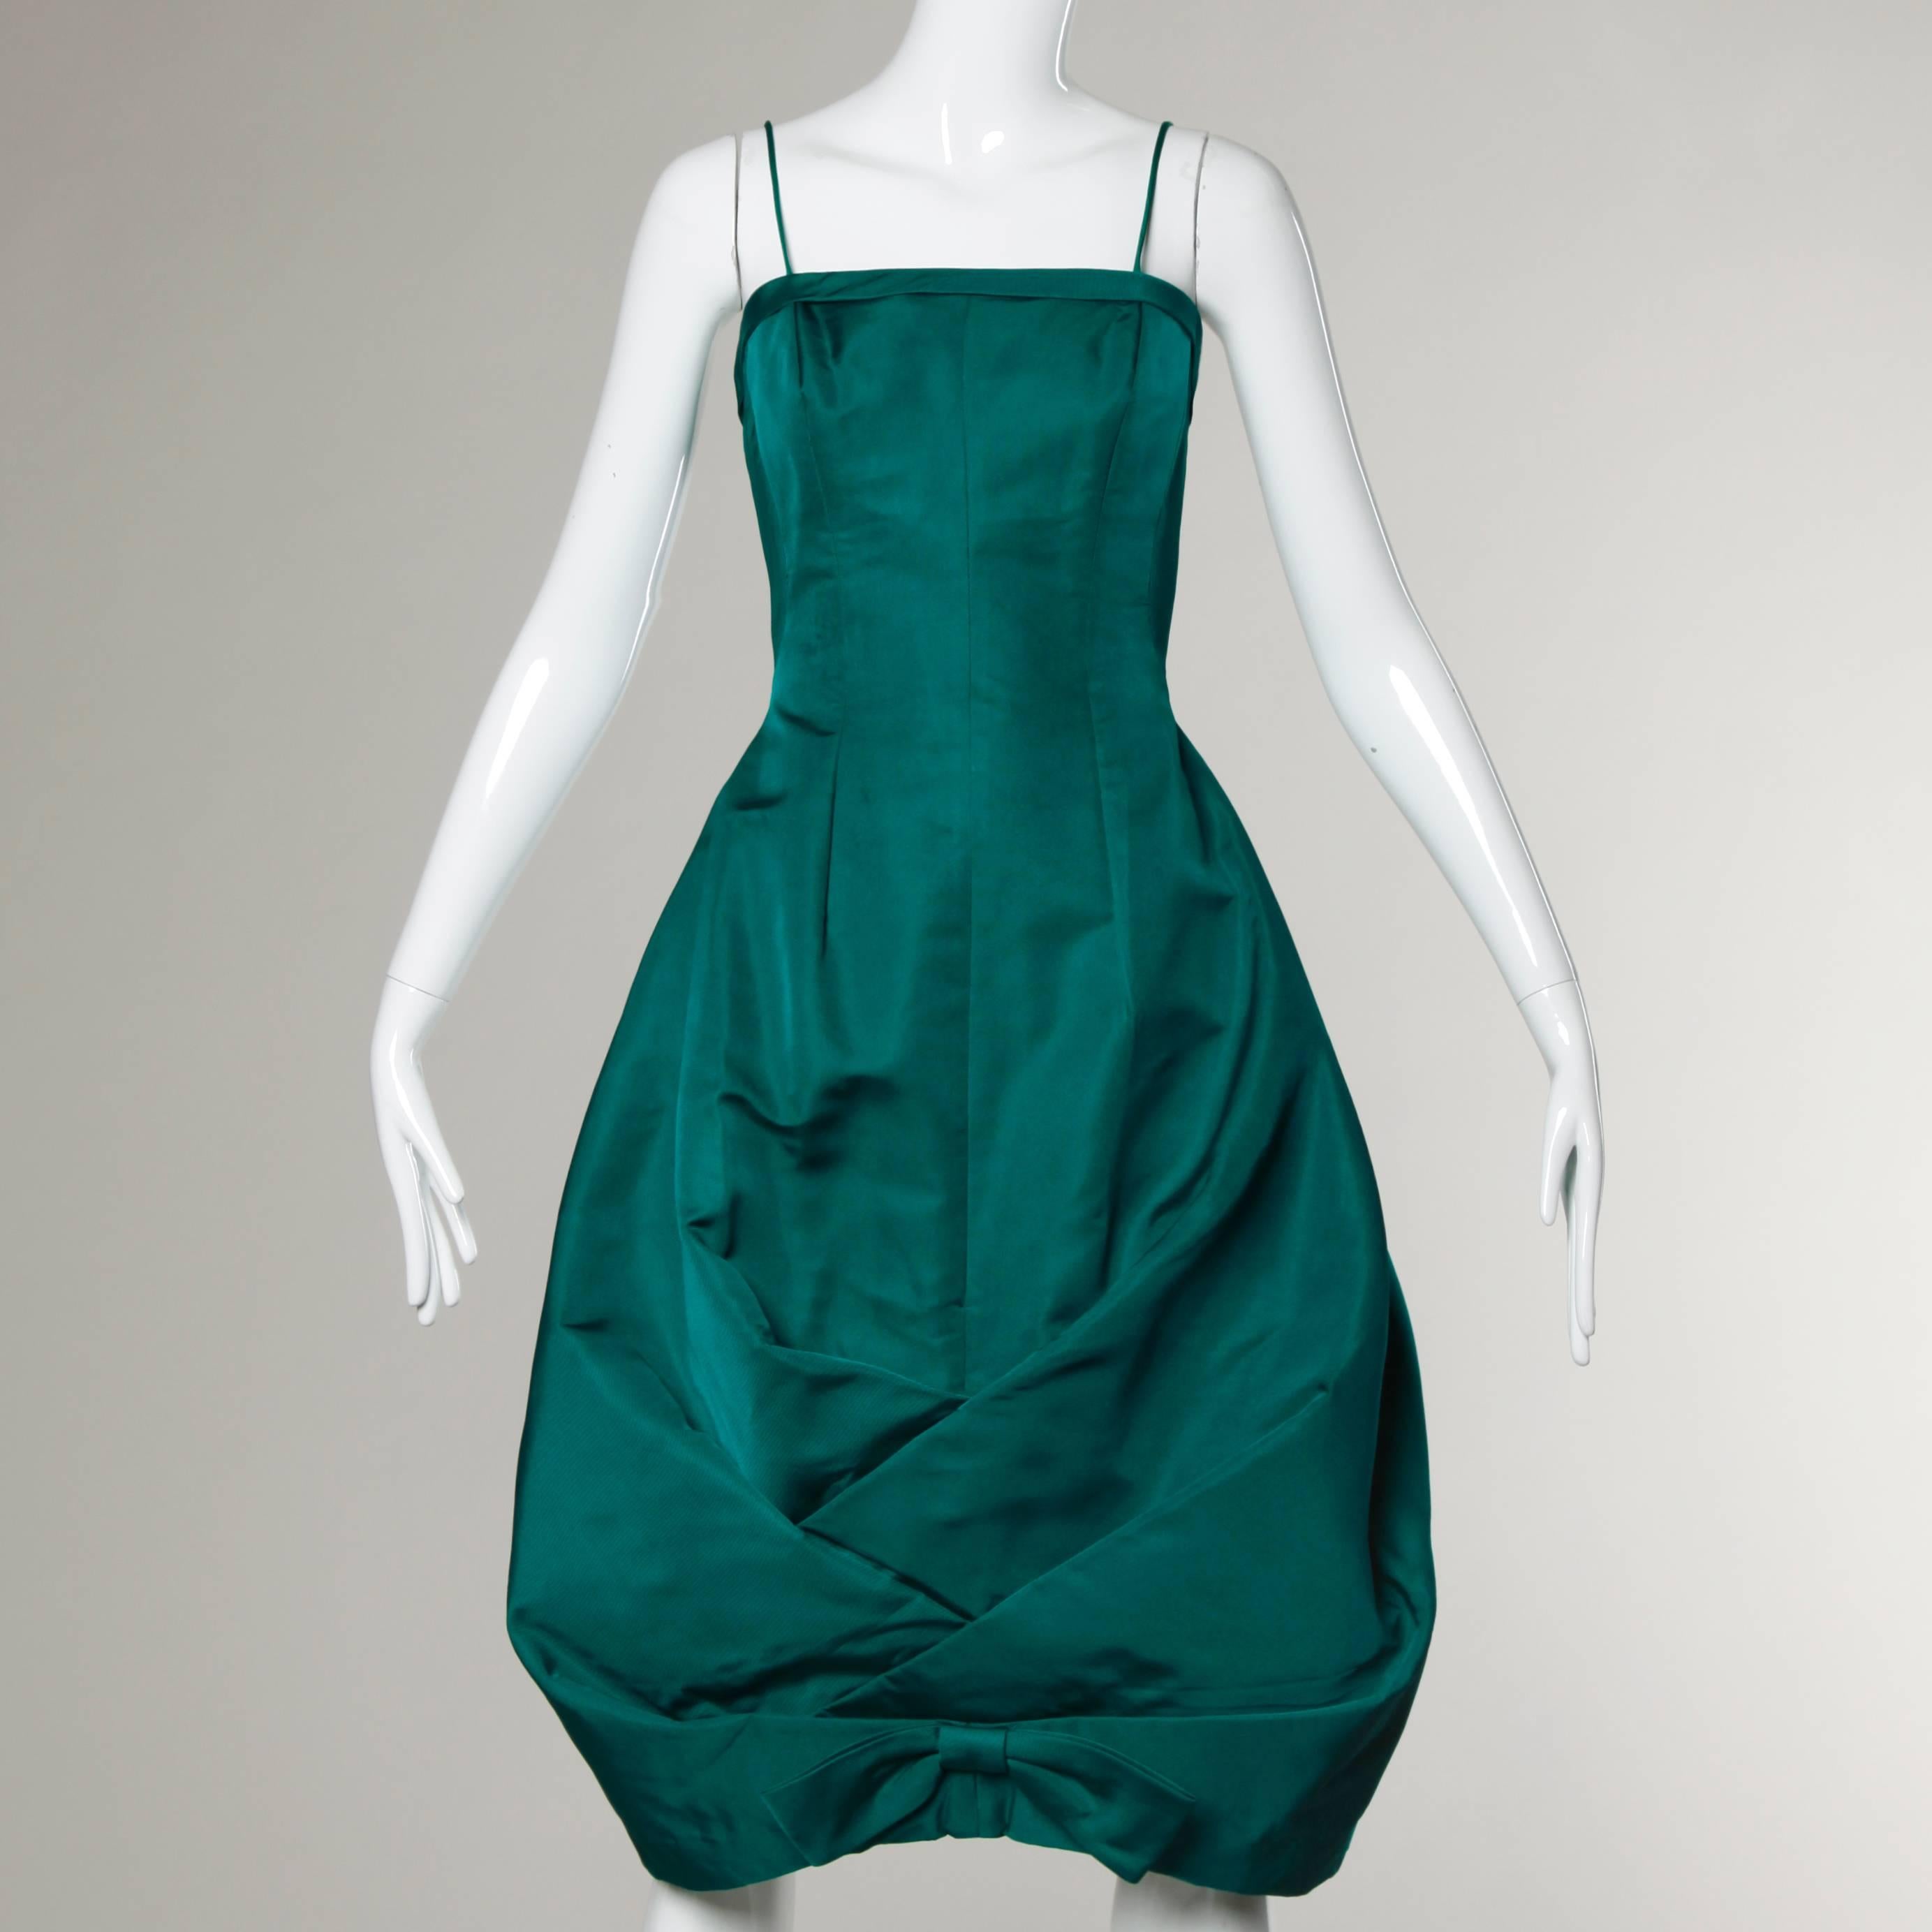 Stunning and unique emerald green silk taffeta dress with an origami bubble hem by Suzy Perette. Bow detail at the bottom and hourglass silhouette.

Details:

Unlined
Back Metal Zip and Hook Closure
Marked Size: 8
Estimated Size: